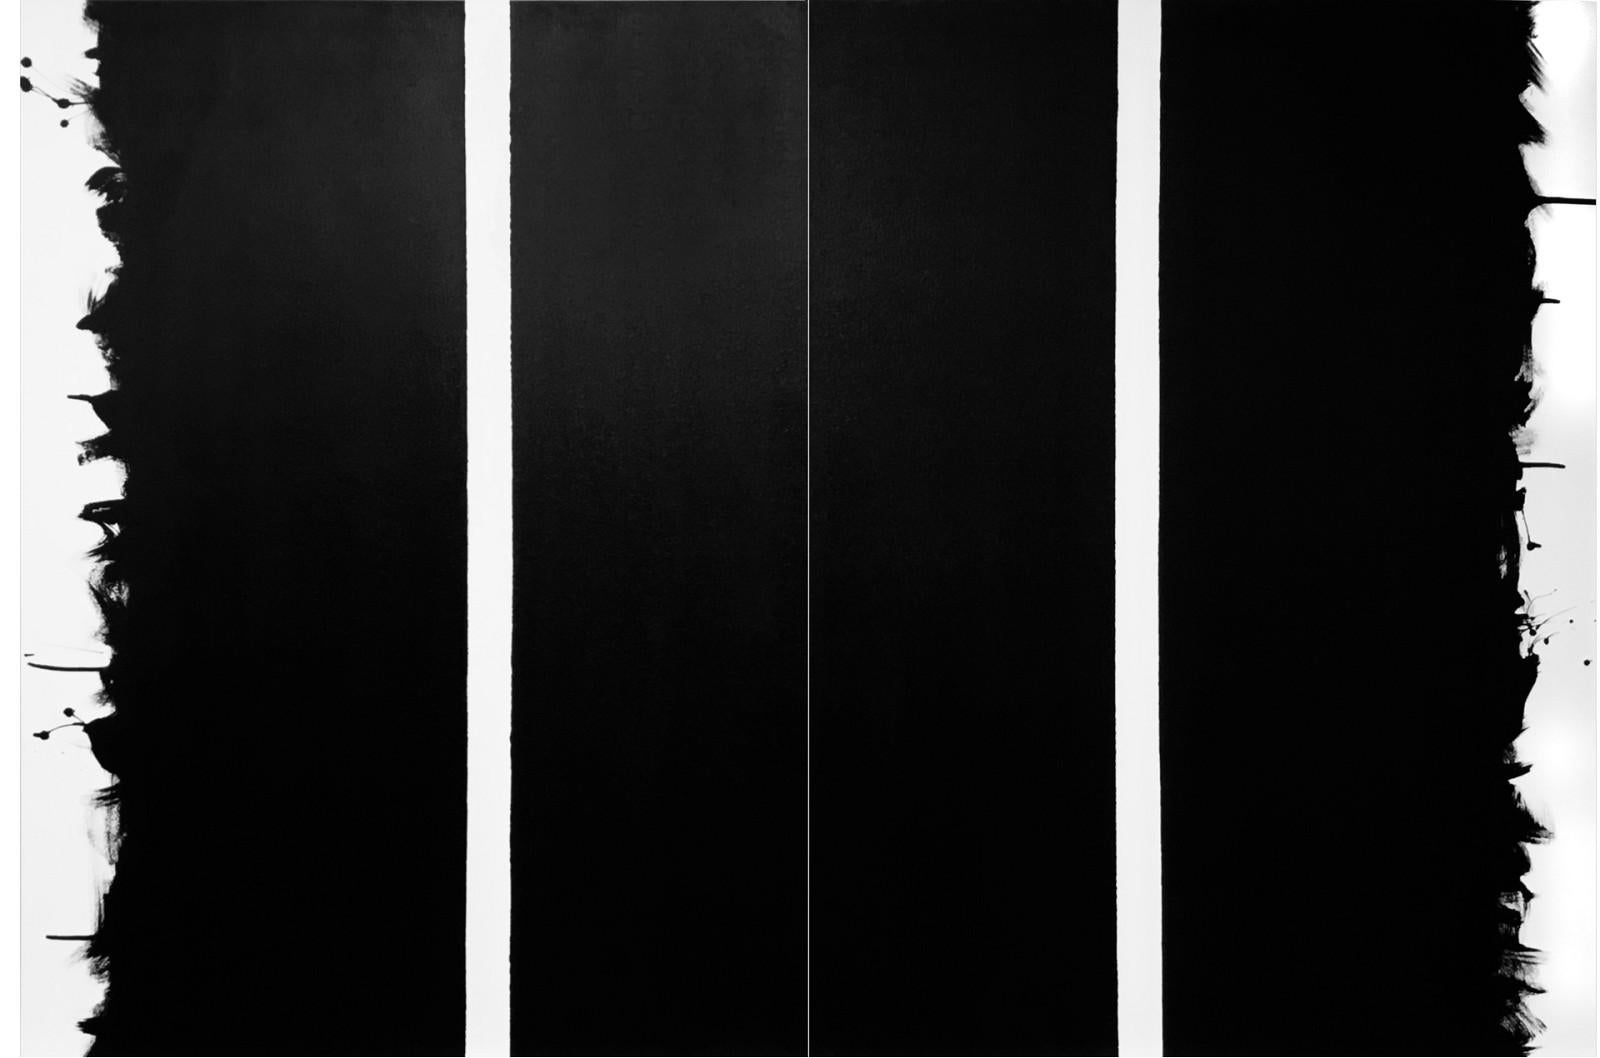 Paradox 01 02 - bold, black and white, abstract minimalist, acrylic on canvas - Painting by Tim Forbes